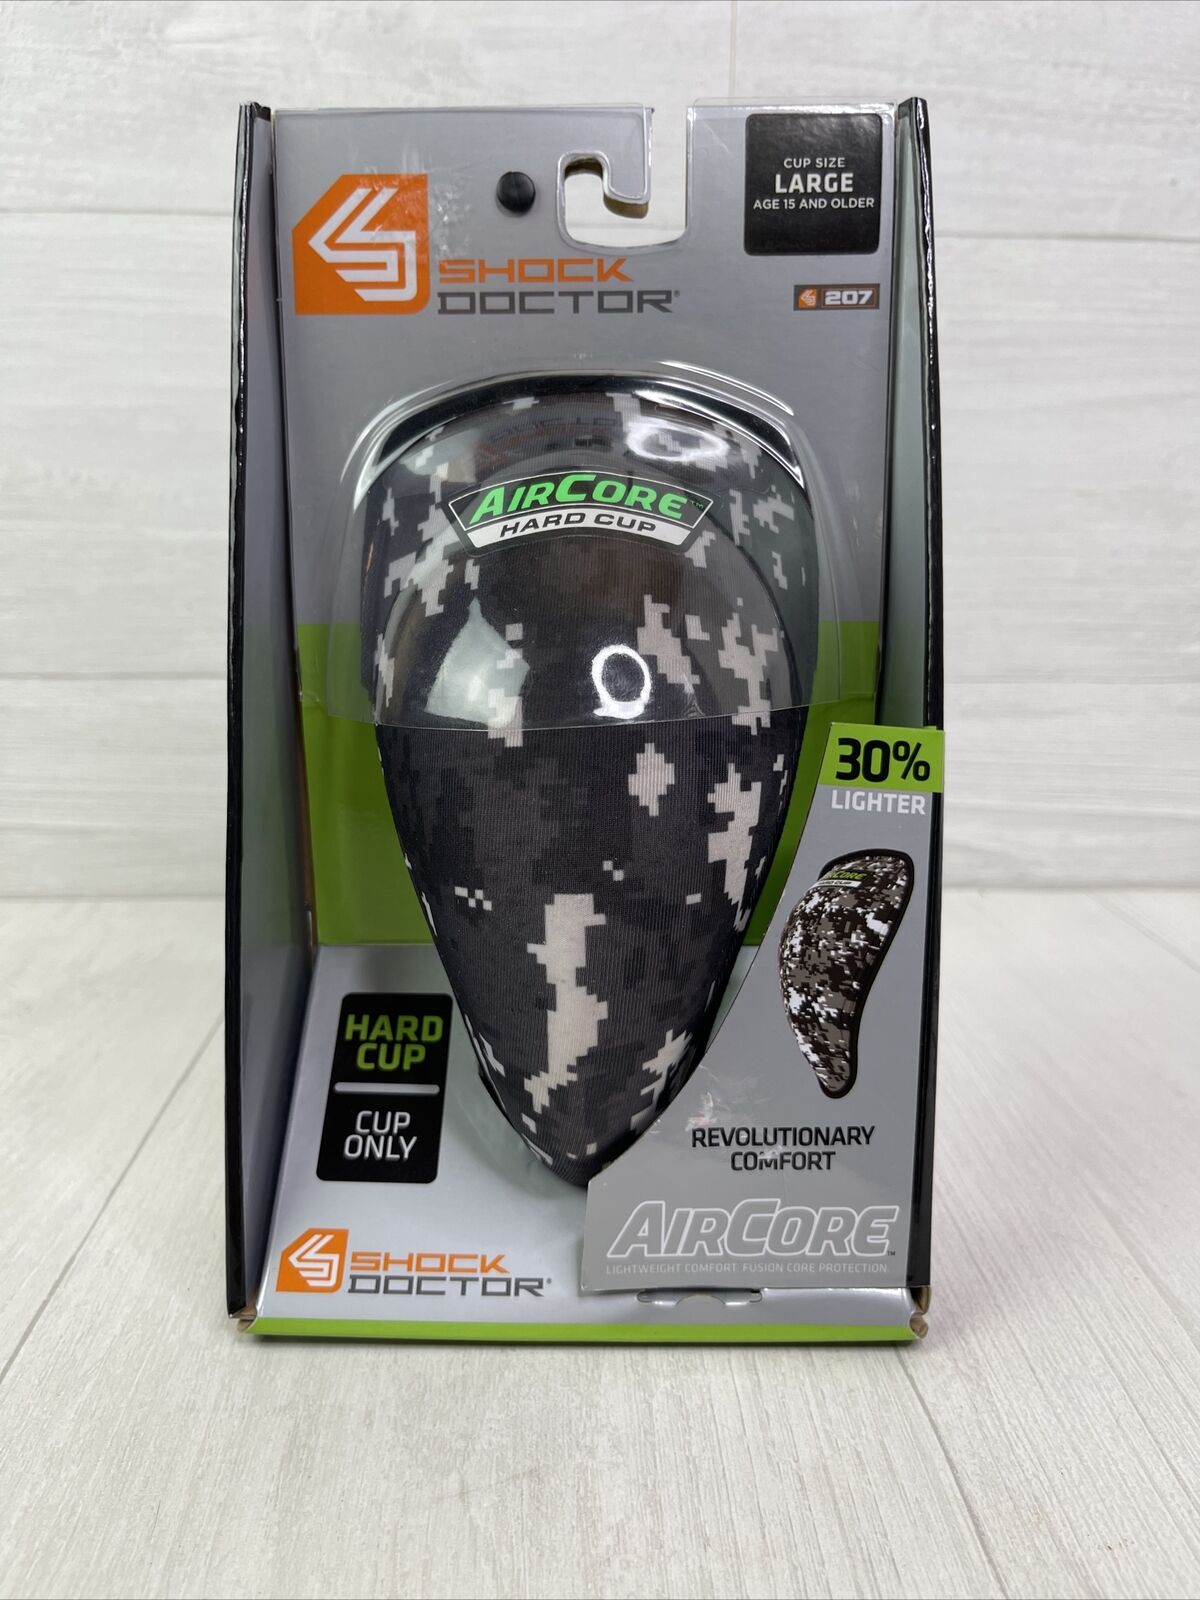 New Shock Doctor 207 Aircore Digital Camo Sports Hard Cup Only Large 15 Years +